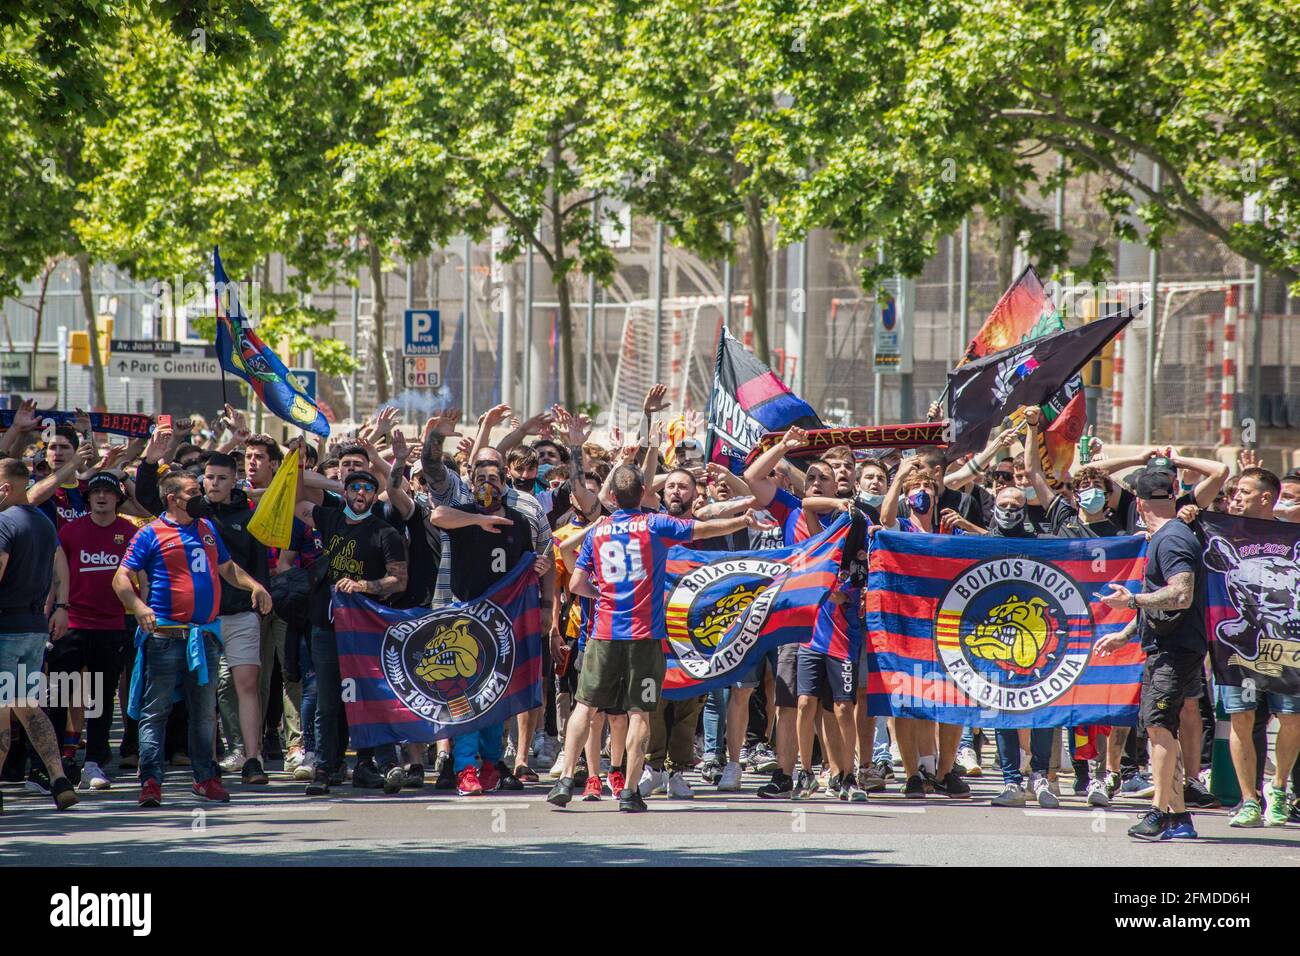 Barcelona, Spain. 08th May, 2021. Soccer Club Barcelona fans hold ultras flags. The ultras supporter group of Football Club Barcelona, Boixos Nois (Crazy Boys) have gathered outside the Camp Nou stadium to motivate the team before the match against Club Atletico de Madrid for the 35th round of La Liga, the Spanish football league. Barça's victory will put the team, currently in third place, ahead of Atletico de Madrid, which occupies the first position. (Photo by Thiago Prudencio/SOPA Images/Sipa USA) Credit: Sipa USA/Alamy Live News Stock Photo